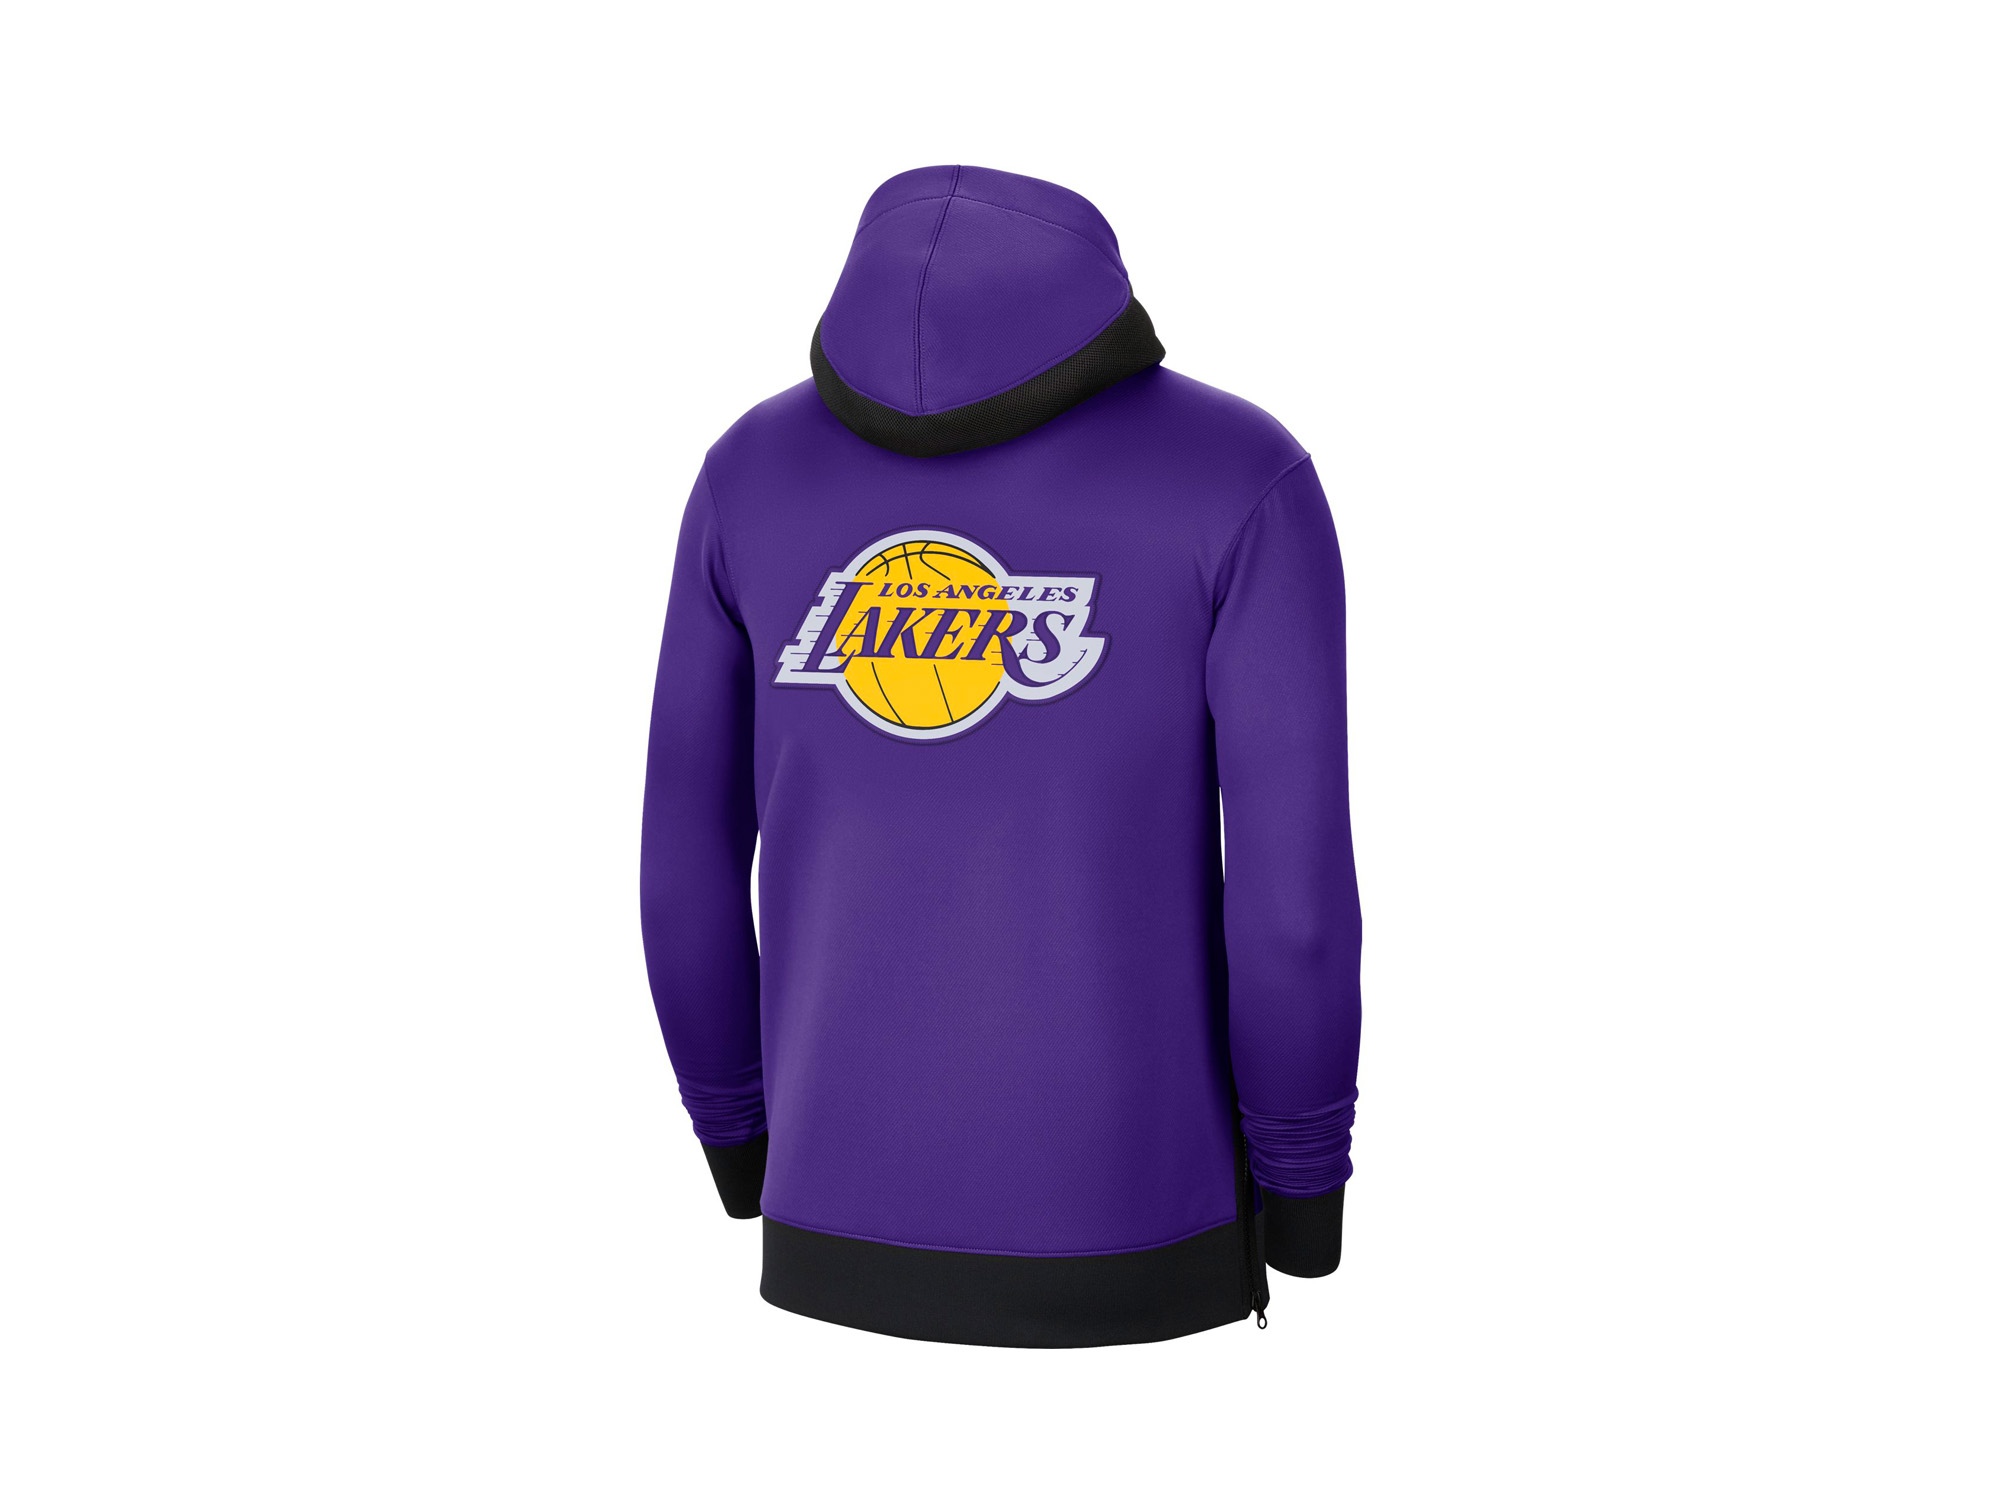 Nike Los Angeles Lakers Therma Flex Showtime Hoody